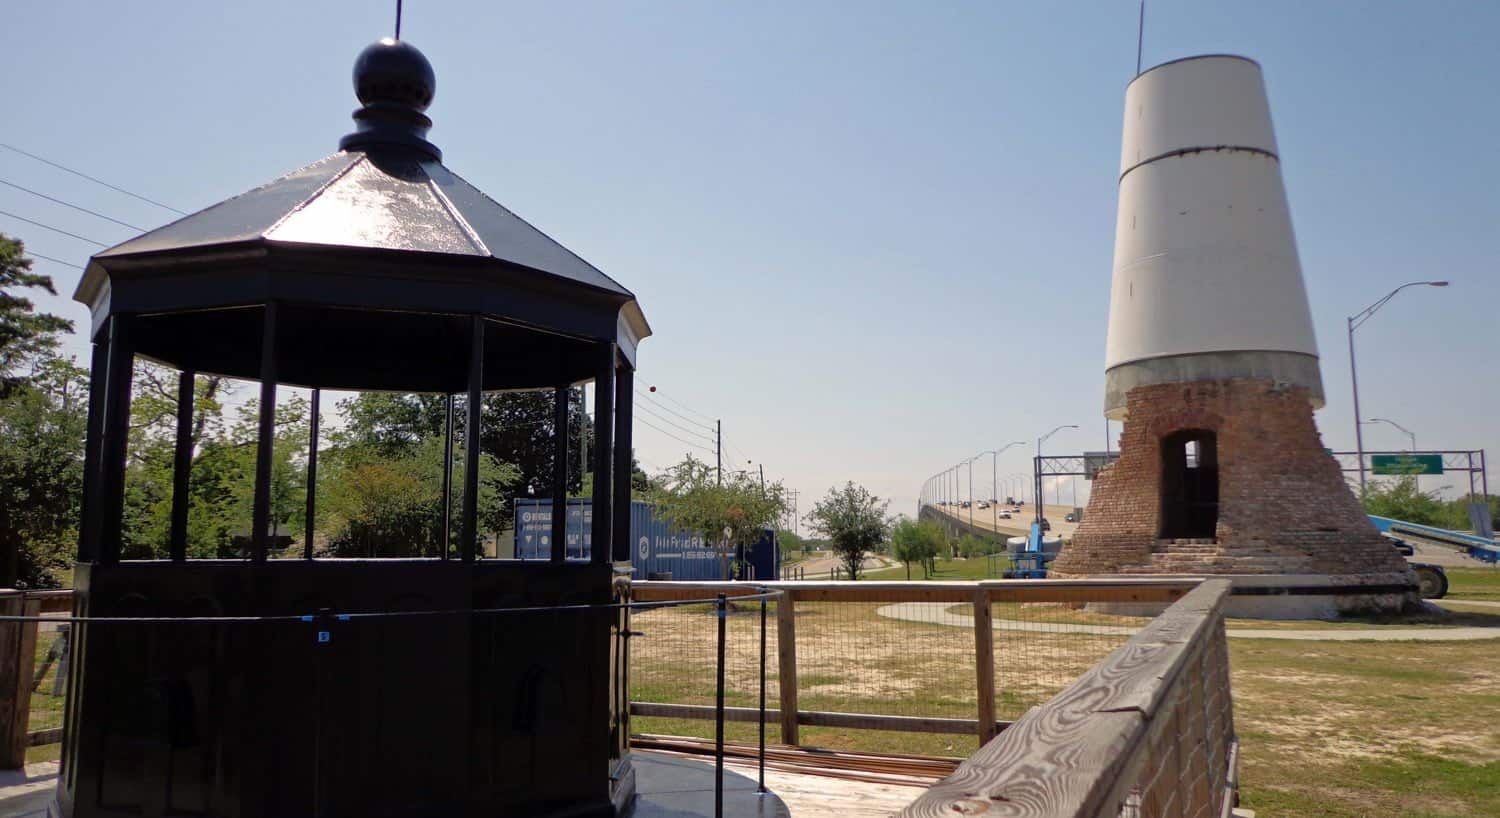 Original lantern gallery in foreground and original base of lighthouse in background during reconstruction